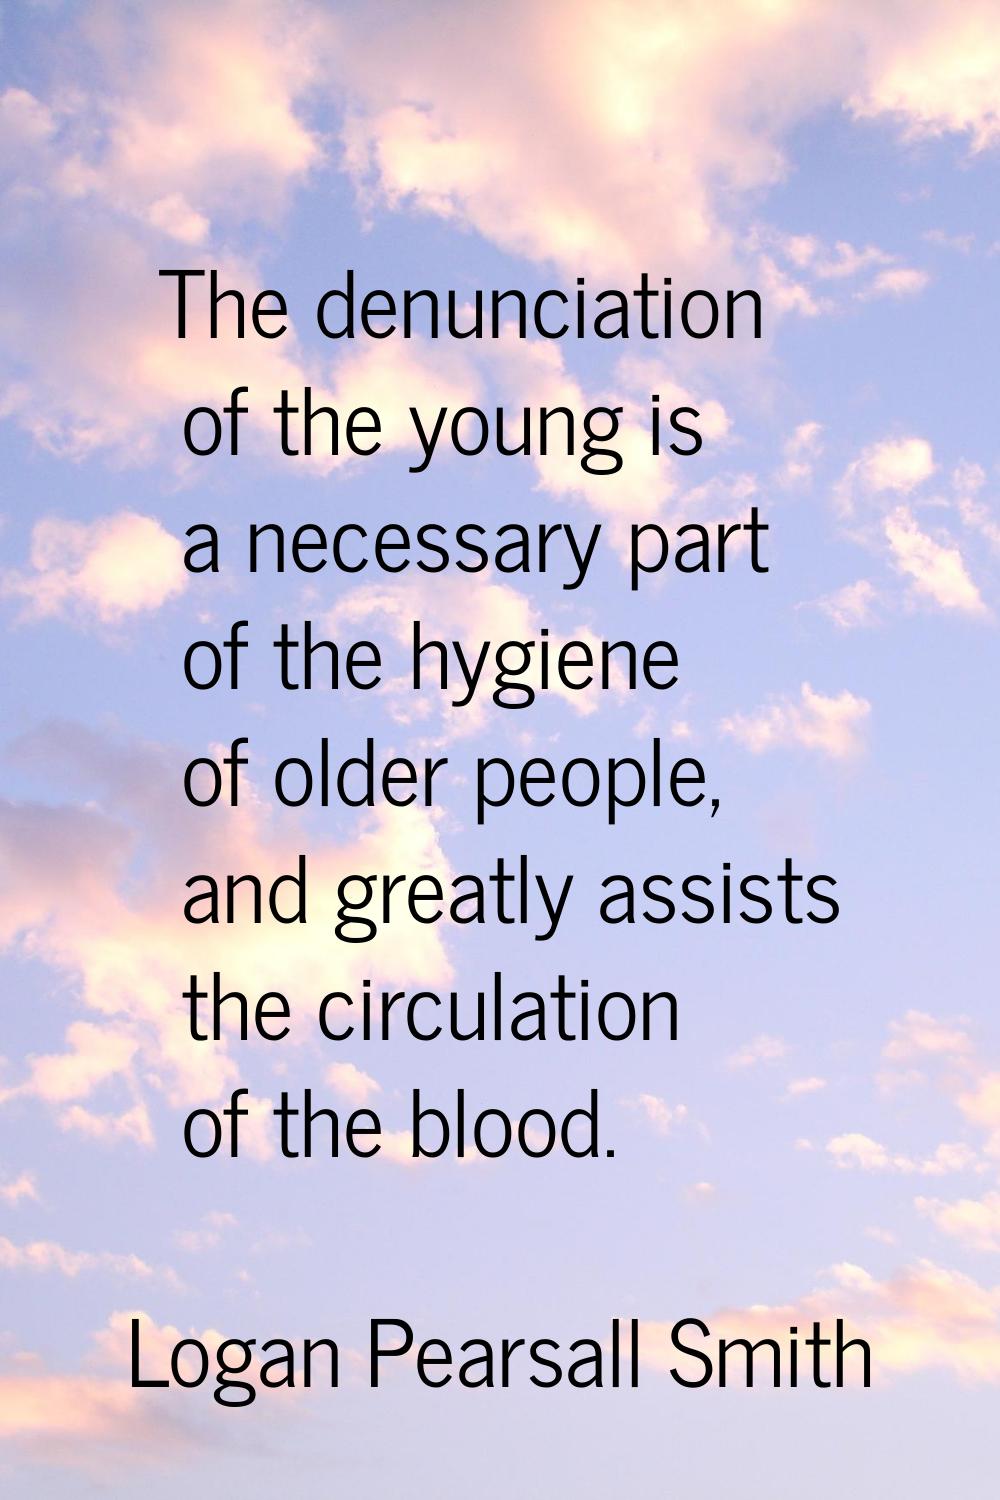 The denunciation of the young is a necessary part of the hygiene of older people, and greatly assis